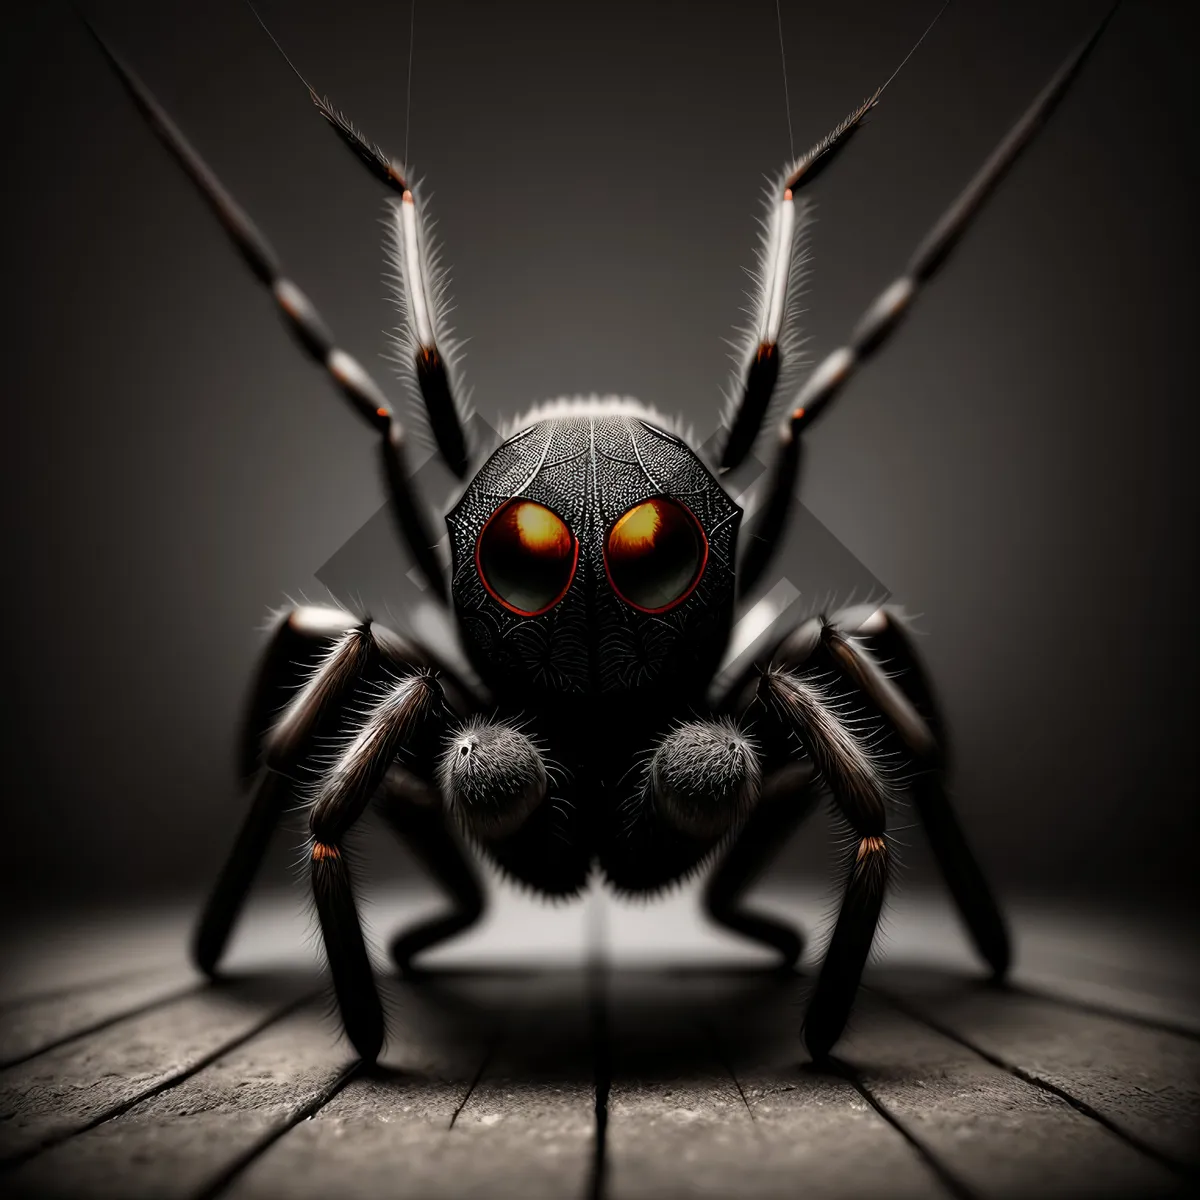 Picture of Black Widow Spider with Dark Wings and Intense Gaze